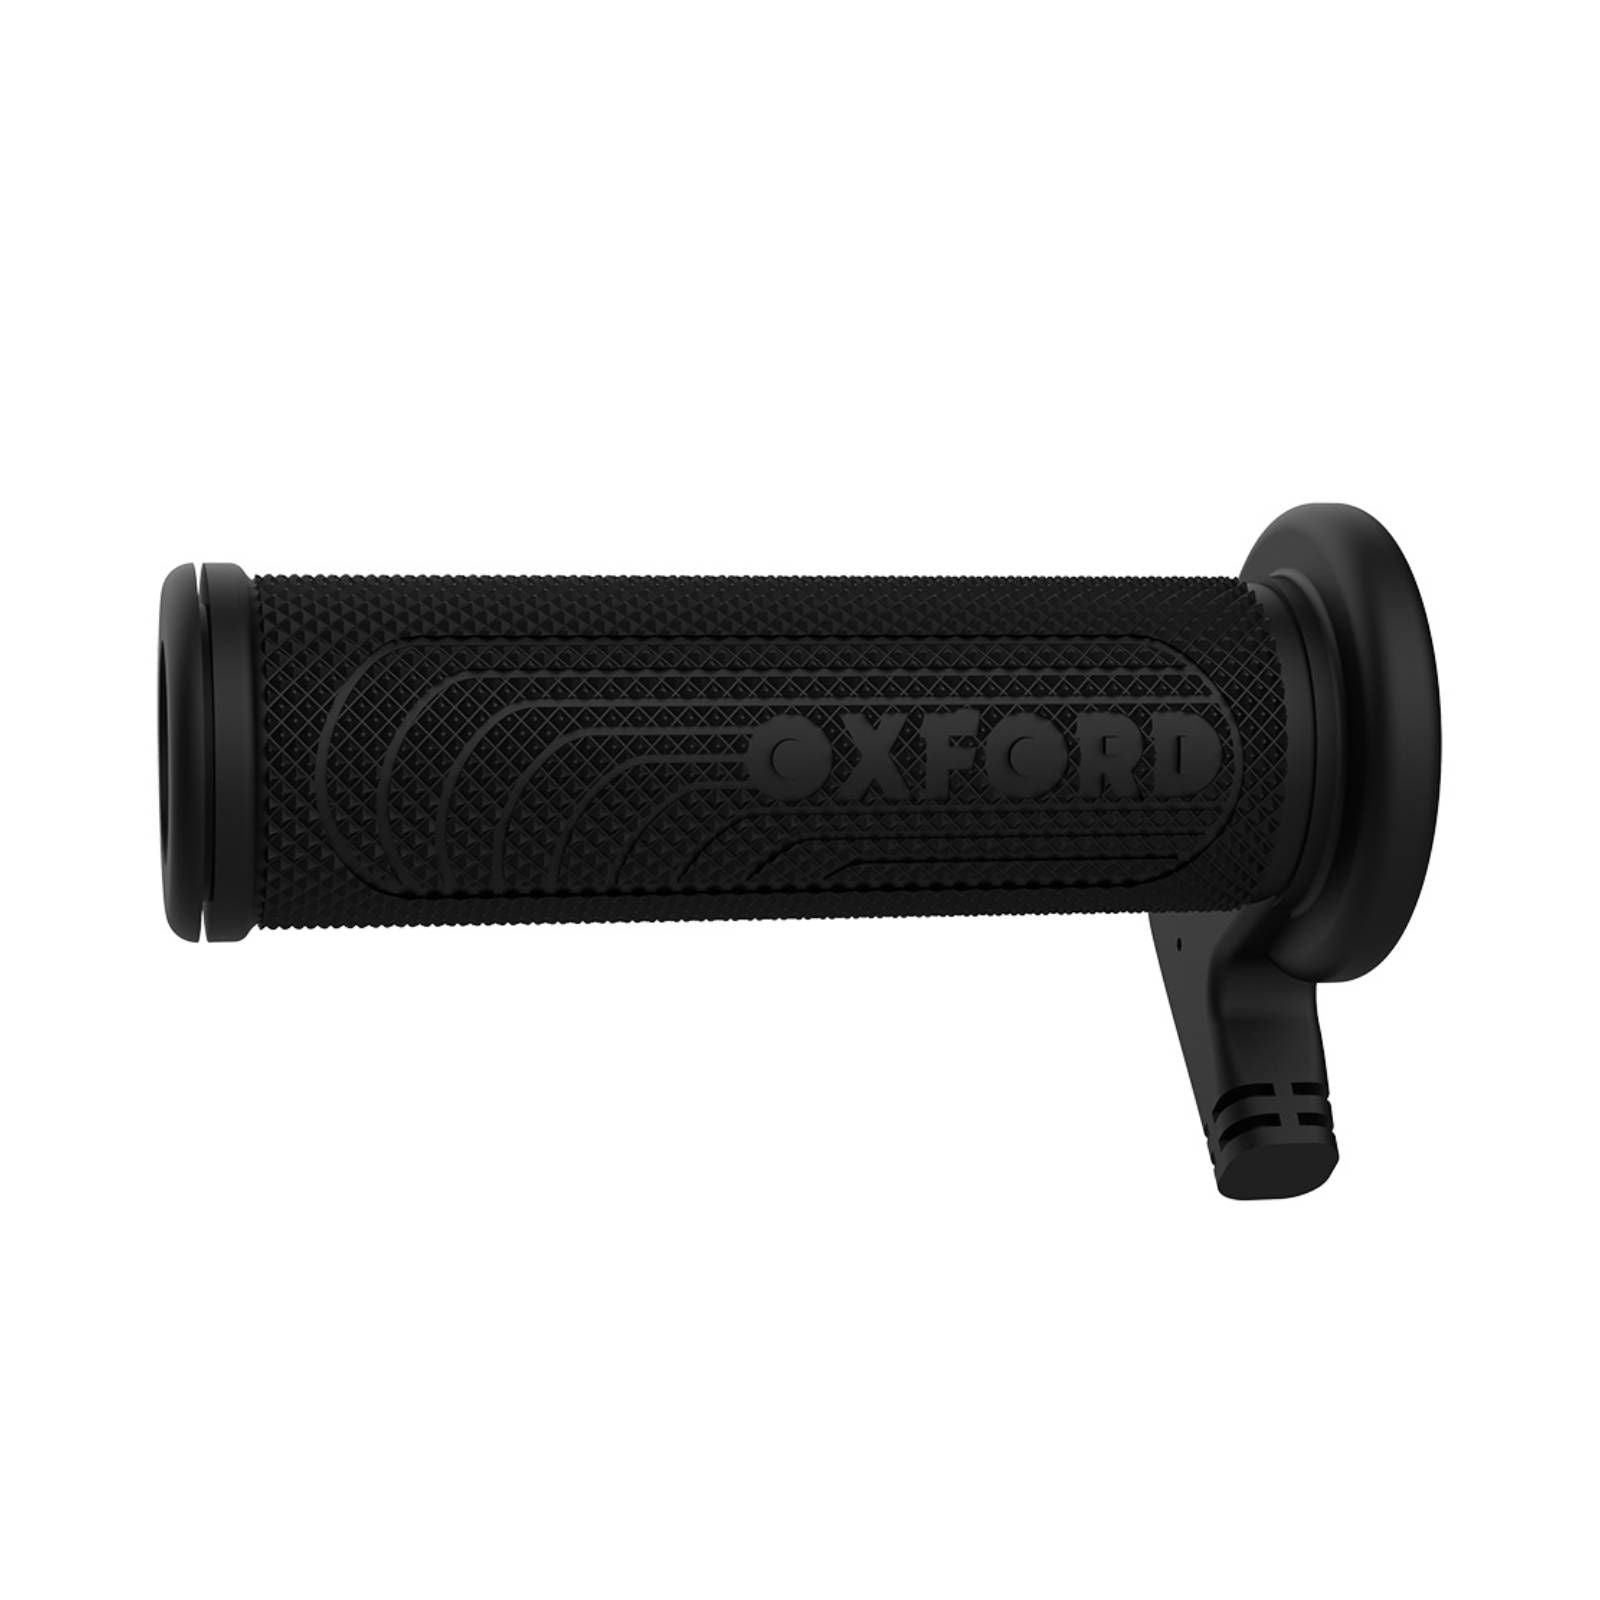 New OXFORD V9 EVO Hotgrips Sport Left Replacement Grip - 6OHMS #OXEL422C